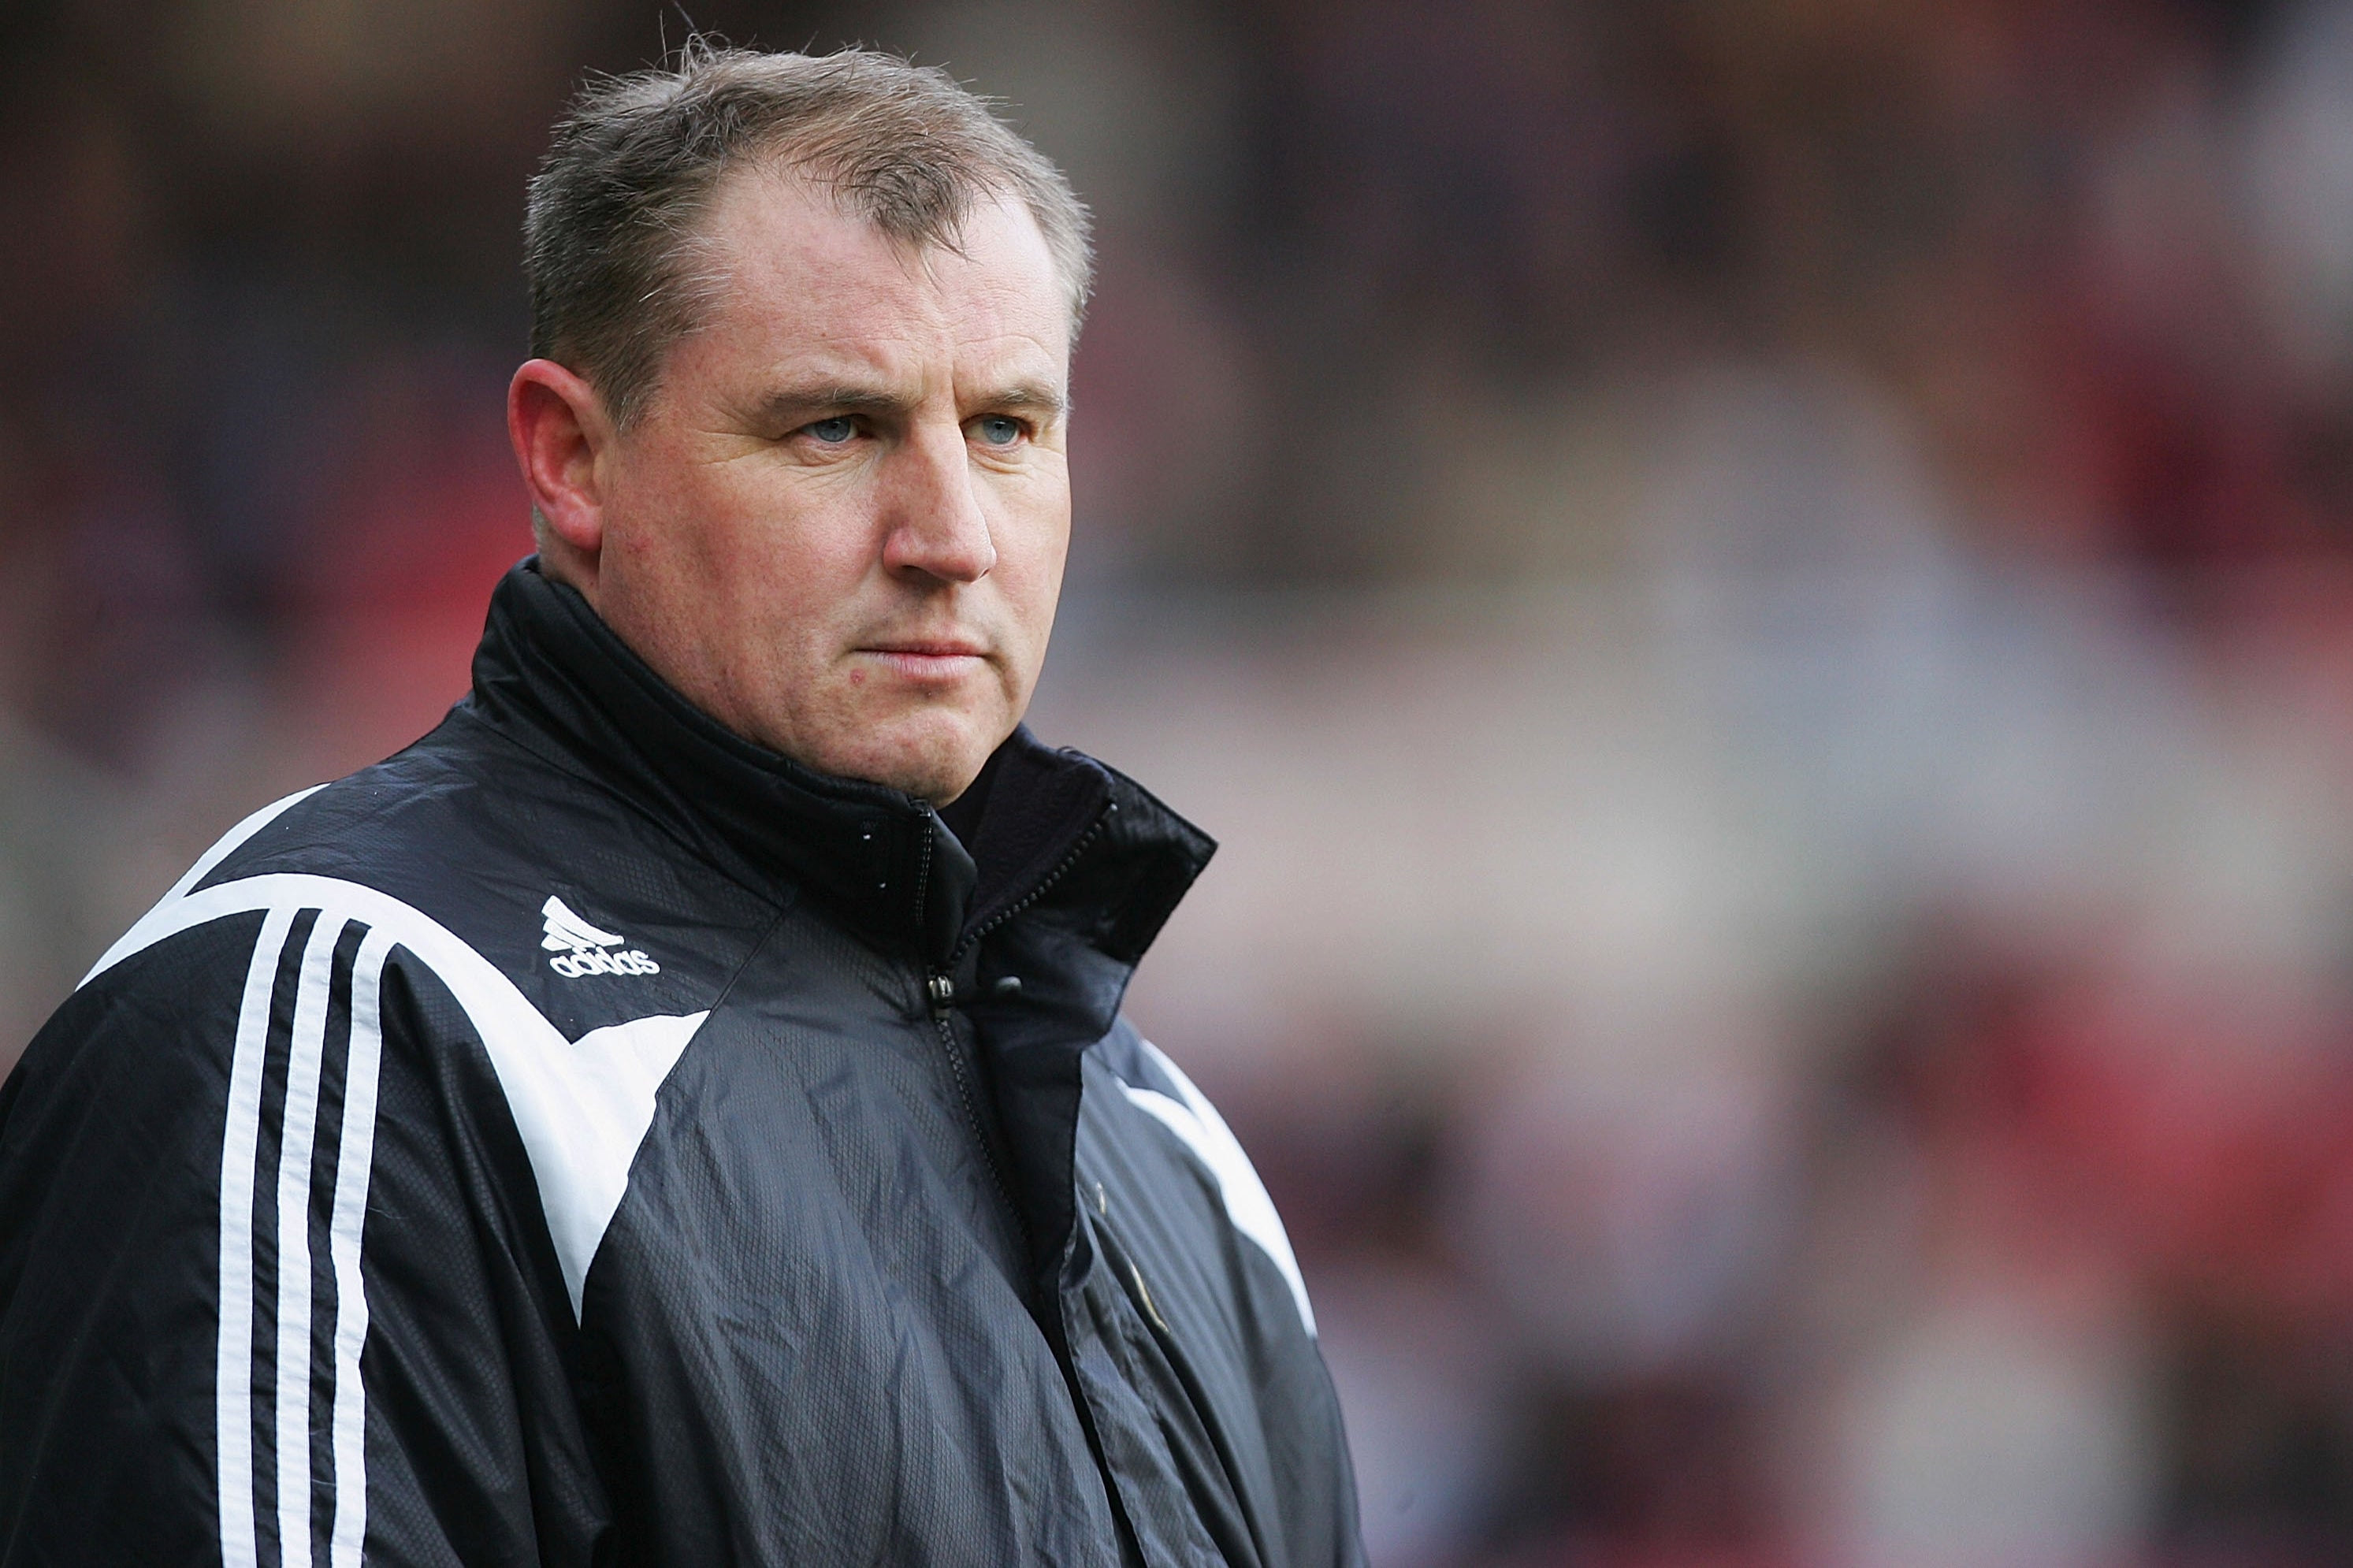 Paul Jewell, the former Wigan manager, has helped his son’s rise